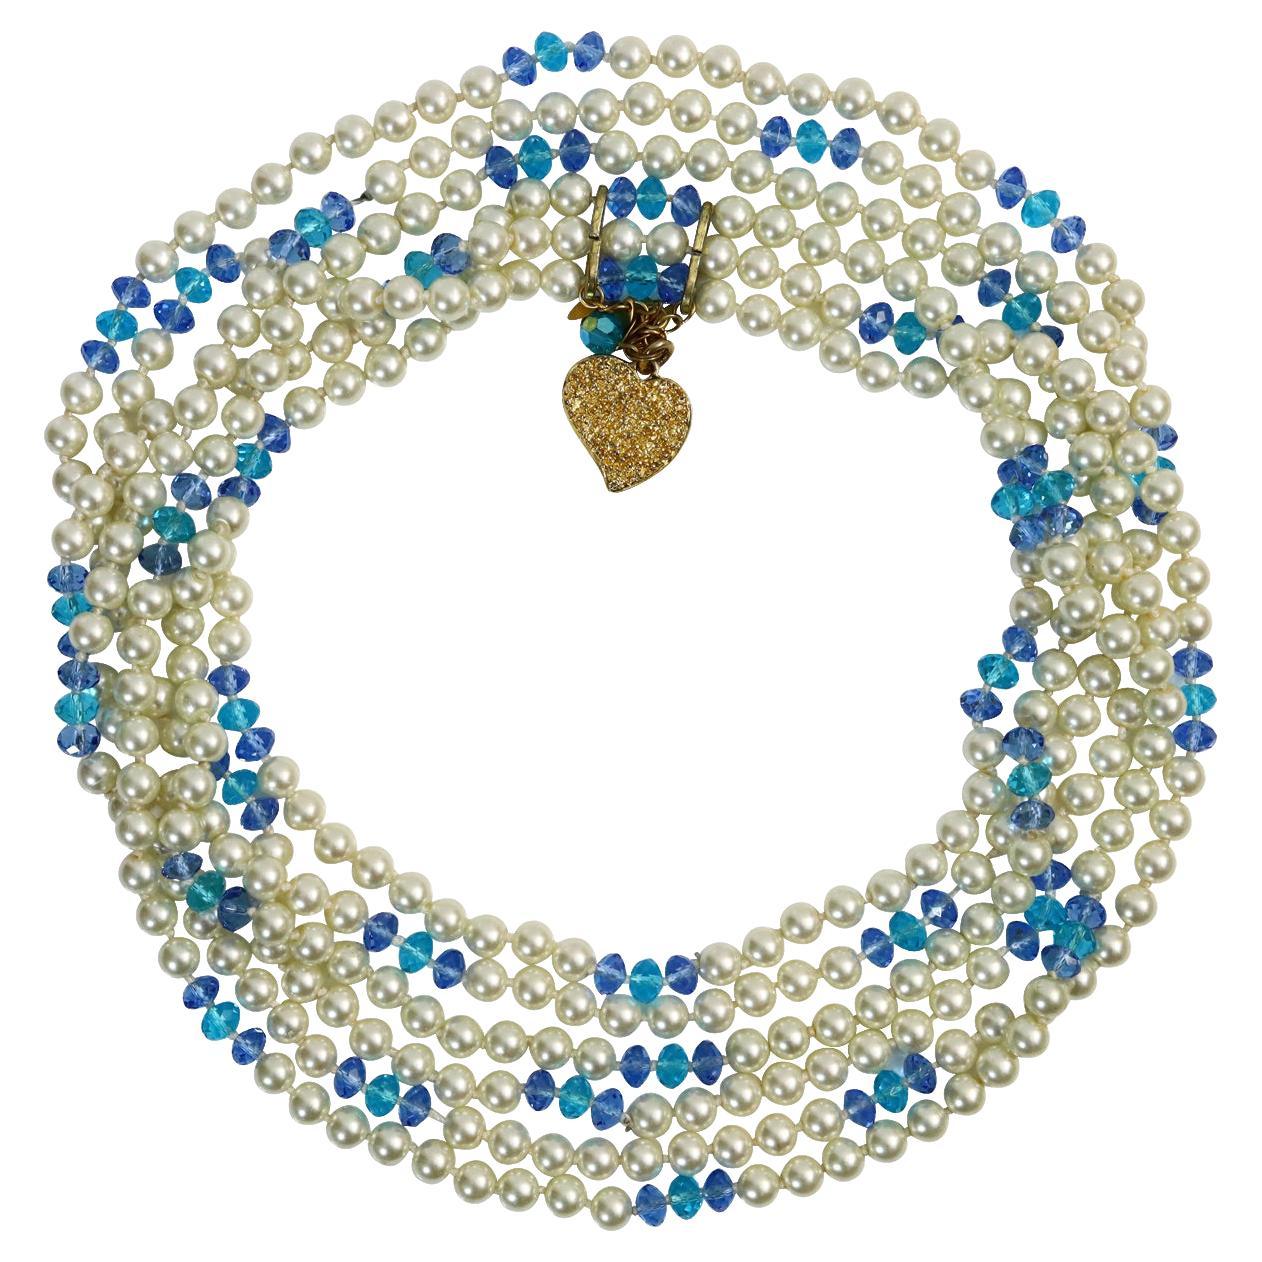 Vintage Yves Saint Laurent YSL 3 Strand Pearl and Blue Bead Necklace Circa 1990s For Sale 4